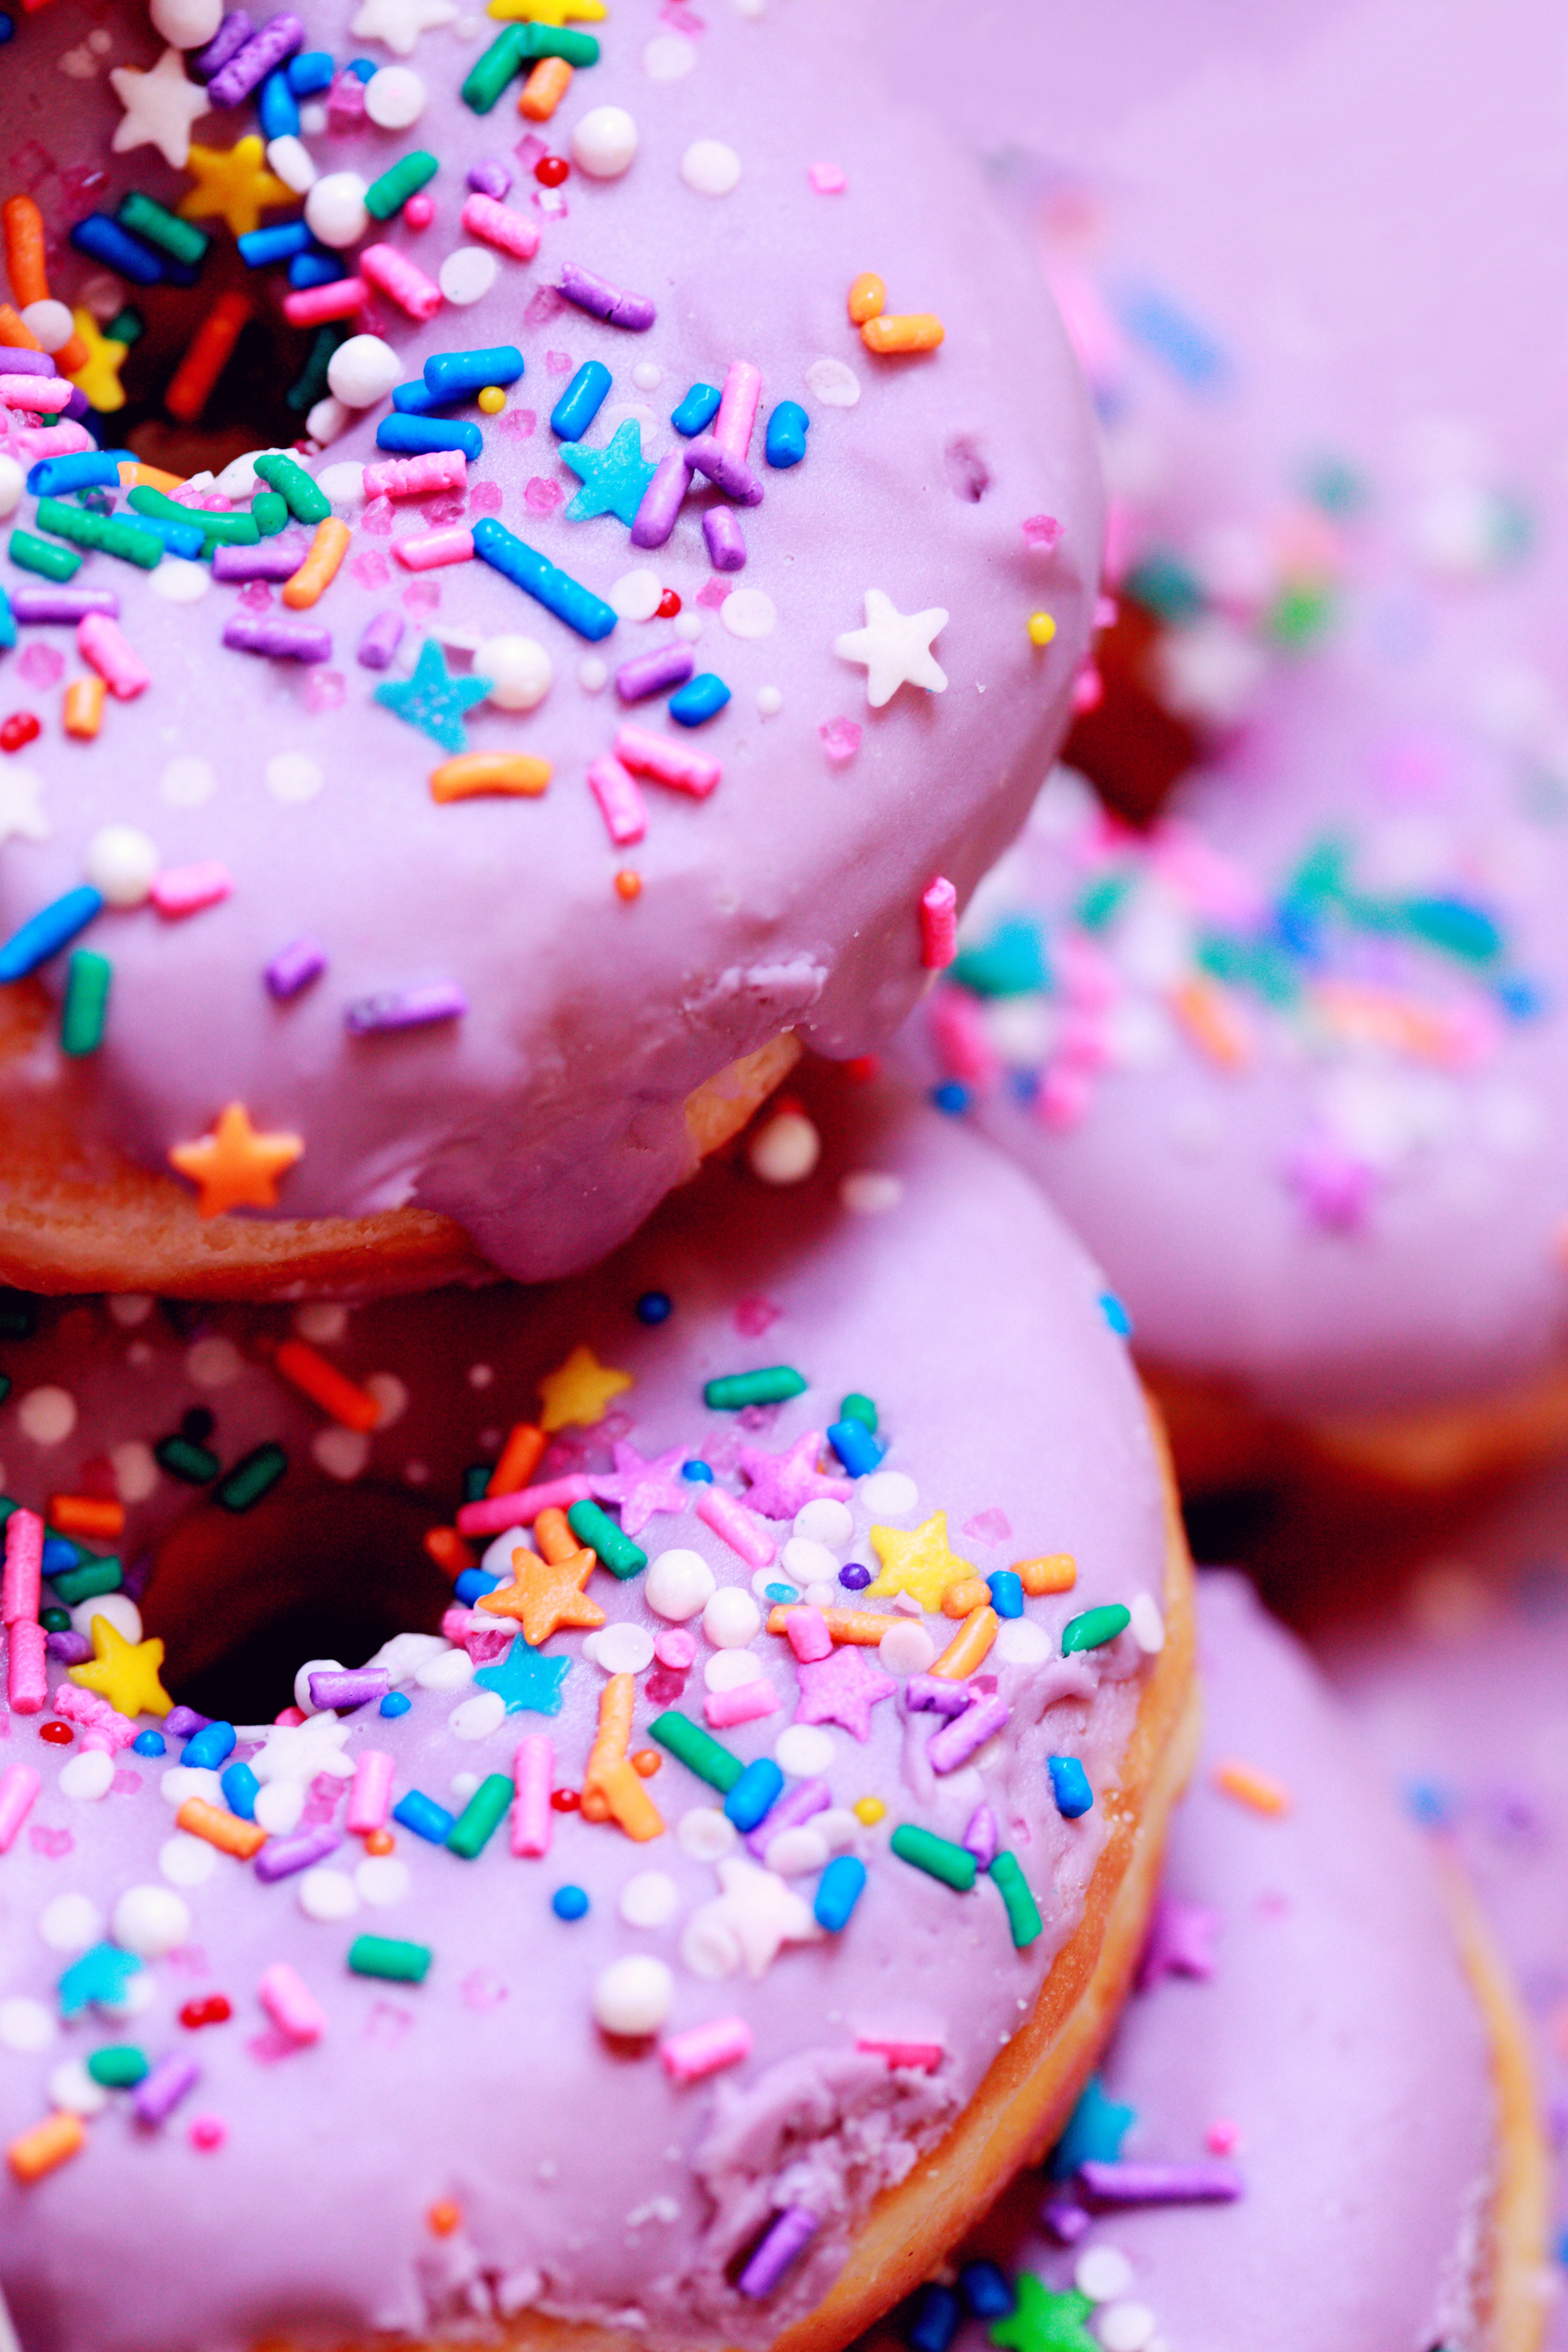 Colorful Donut Wallpapers